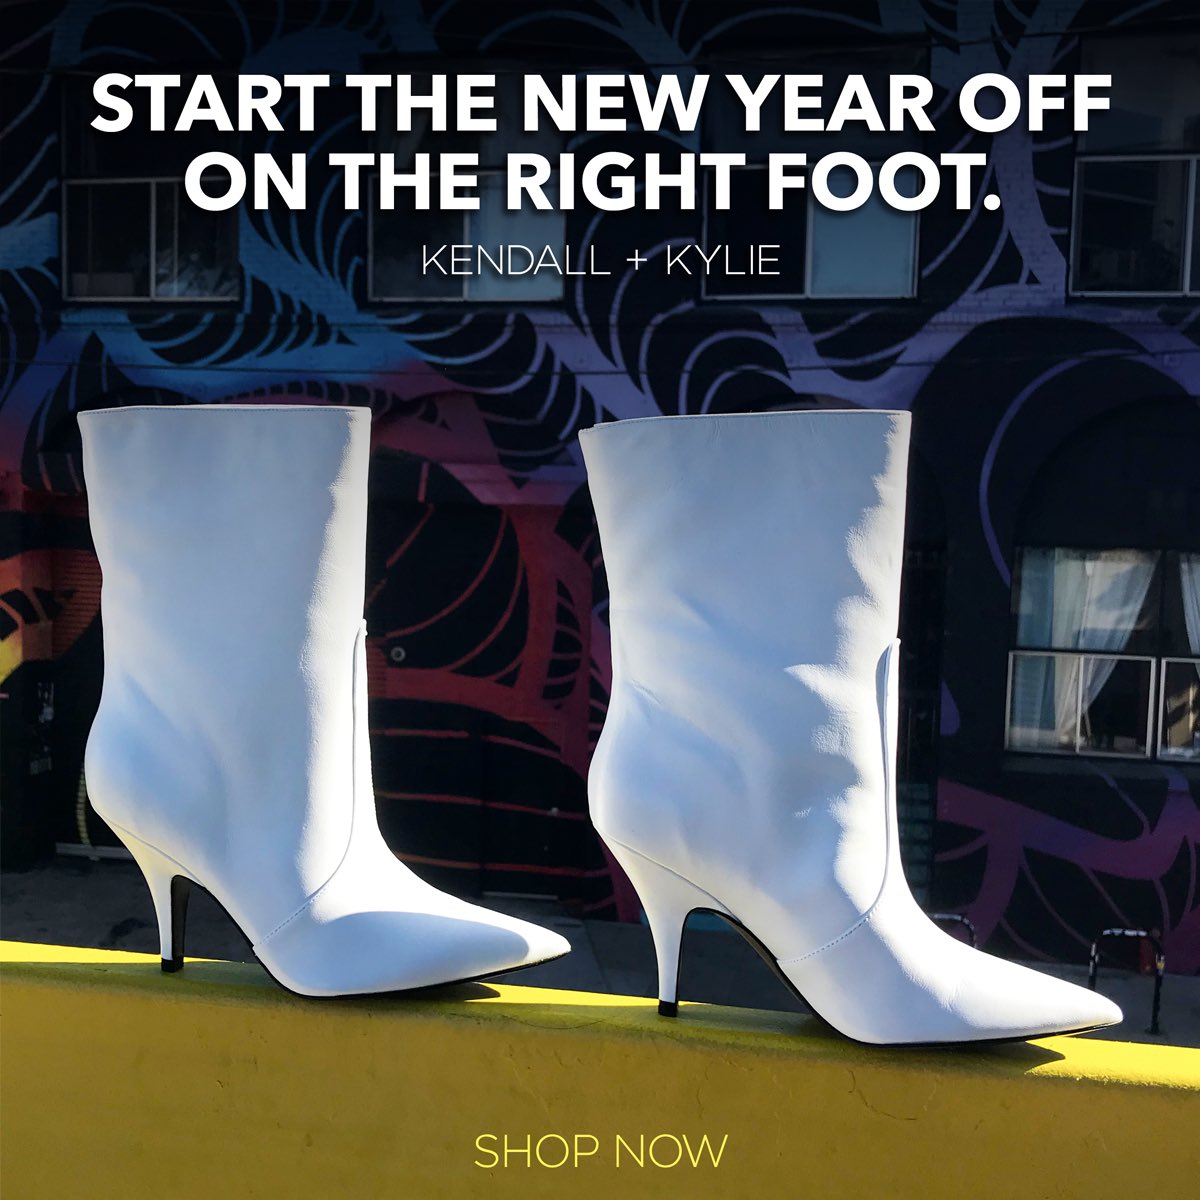 shop footwear from @kendallandkylie and start 2018 on the right foot!
Visit https://t.co/3cyzlinqfC https://t.co/NCW4bXtxMZ